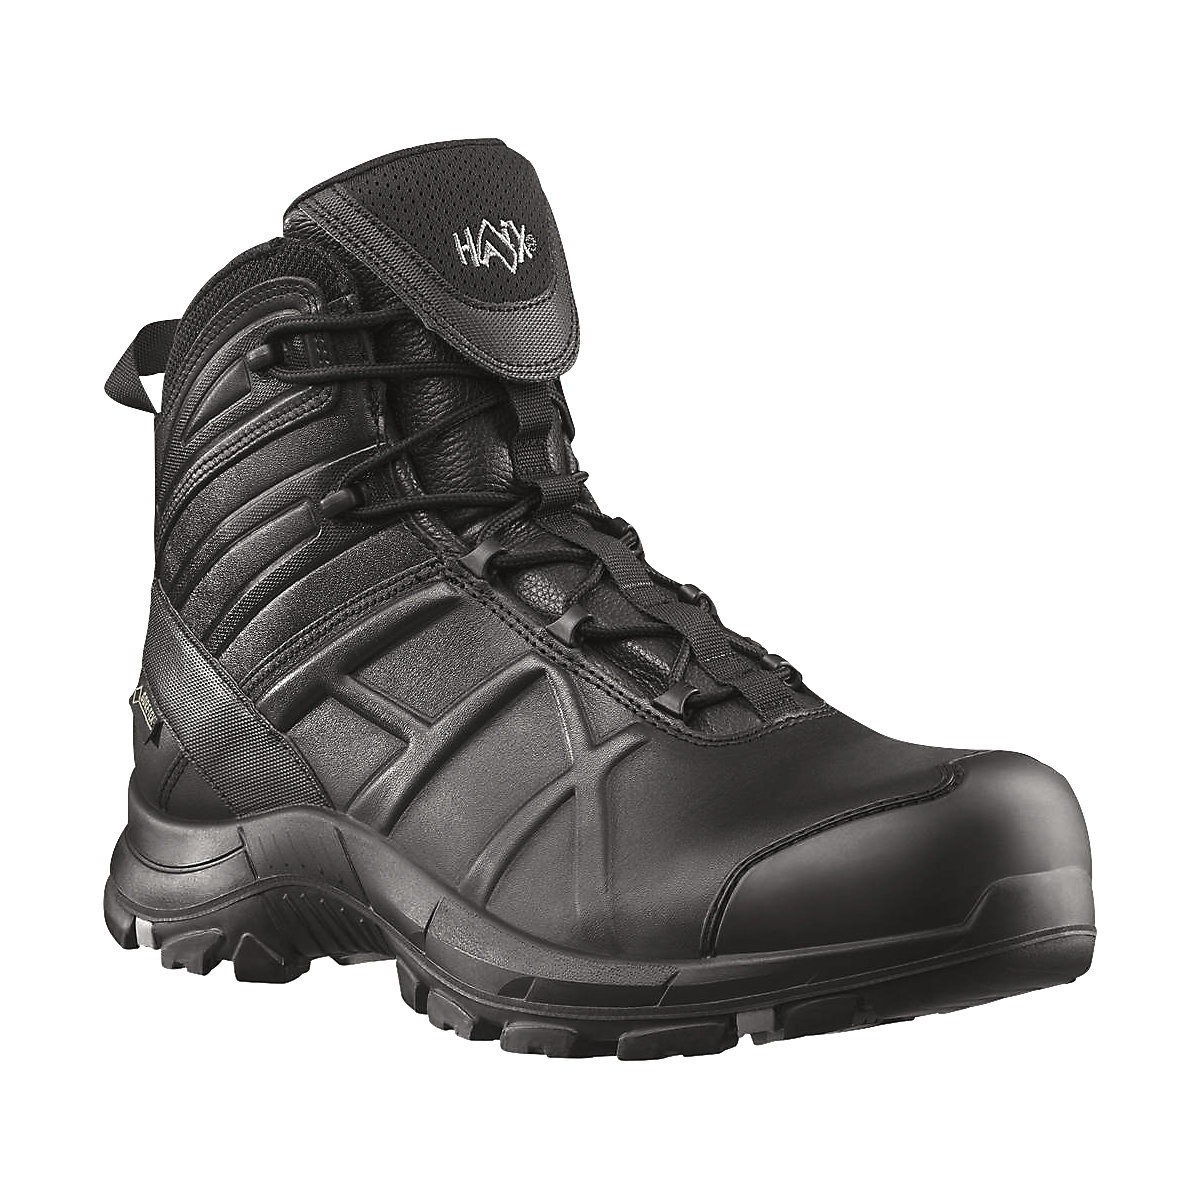 BLACK EAGLE ESD S3 SRC safety boot